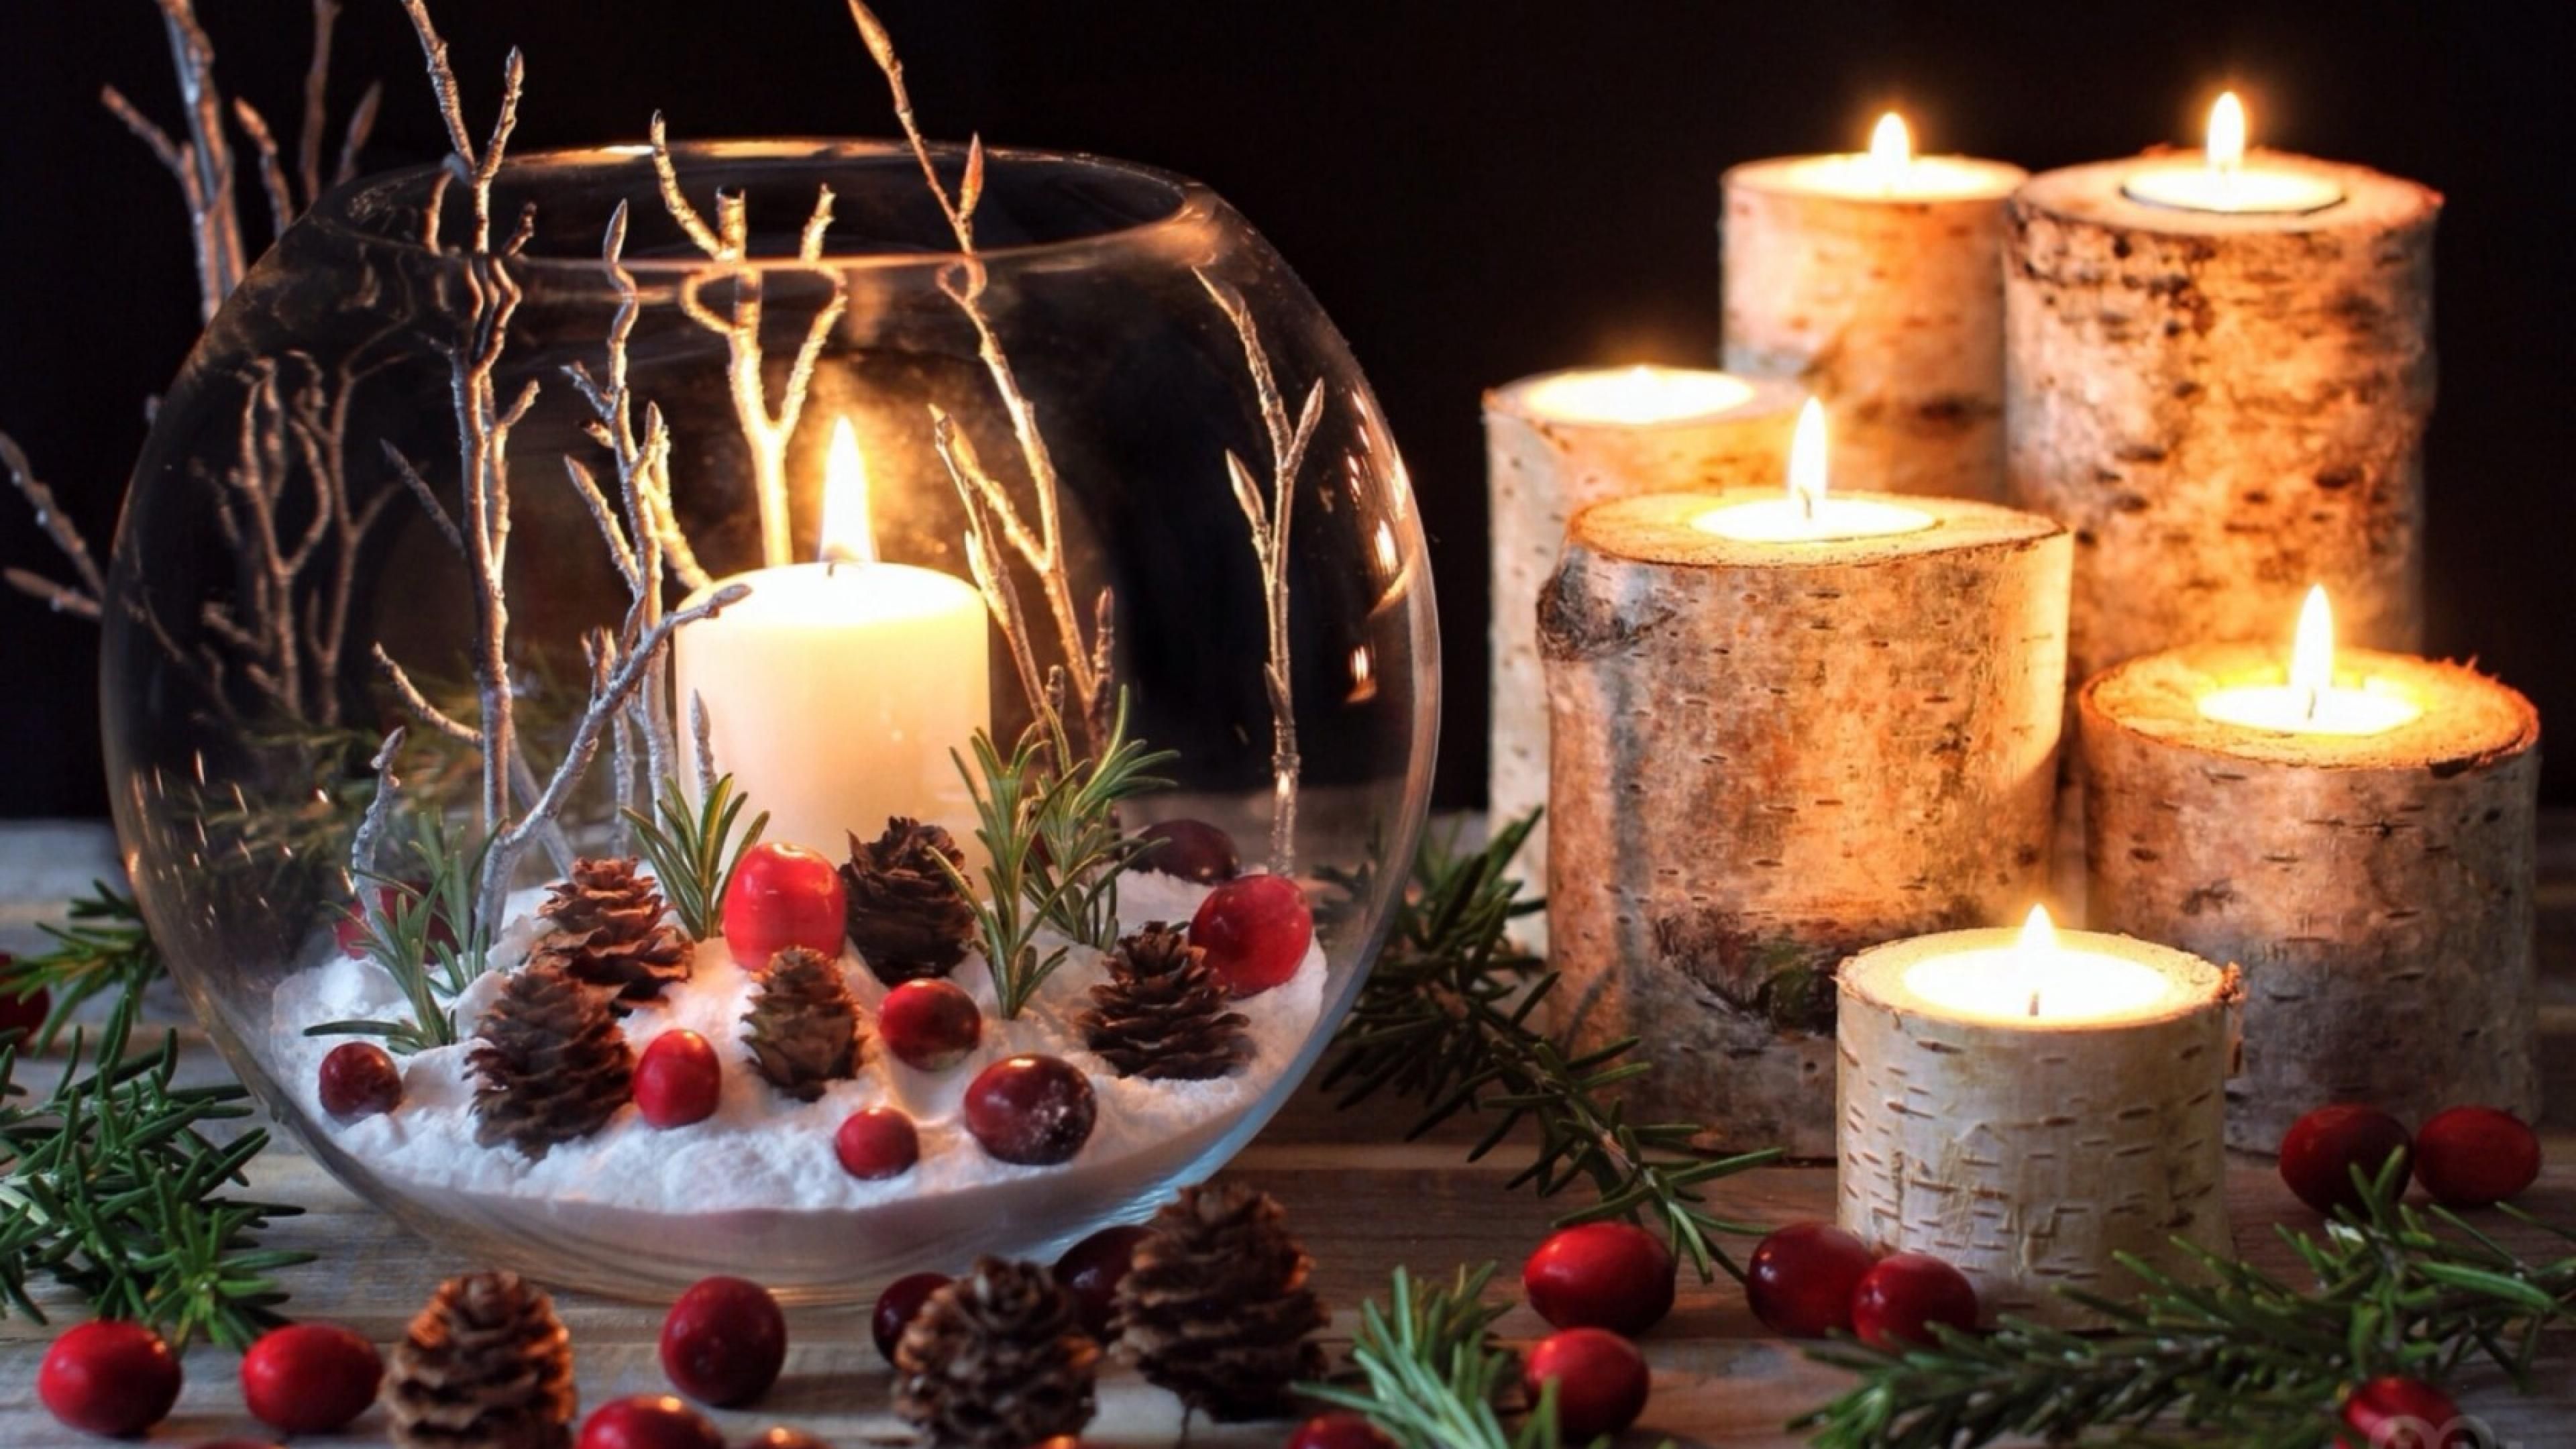 Click Here To Download In HD Format >> Candles Wallpaper 42 Wallpaper C. Winter Candle, Candles Wallpaper, Winter Solstice